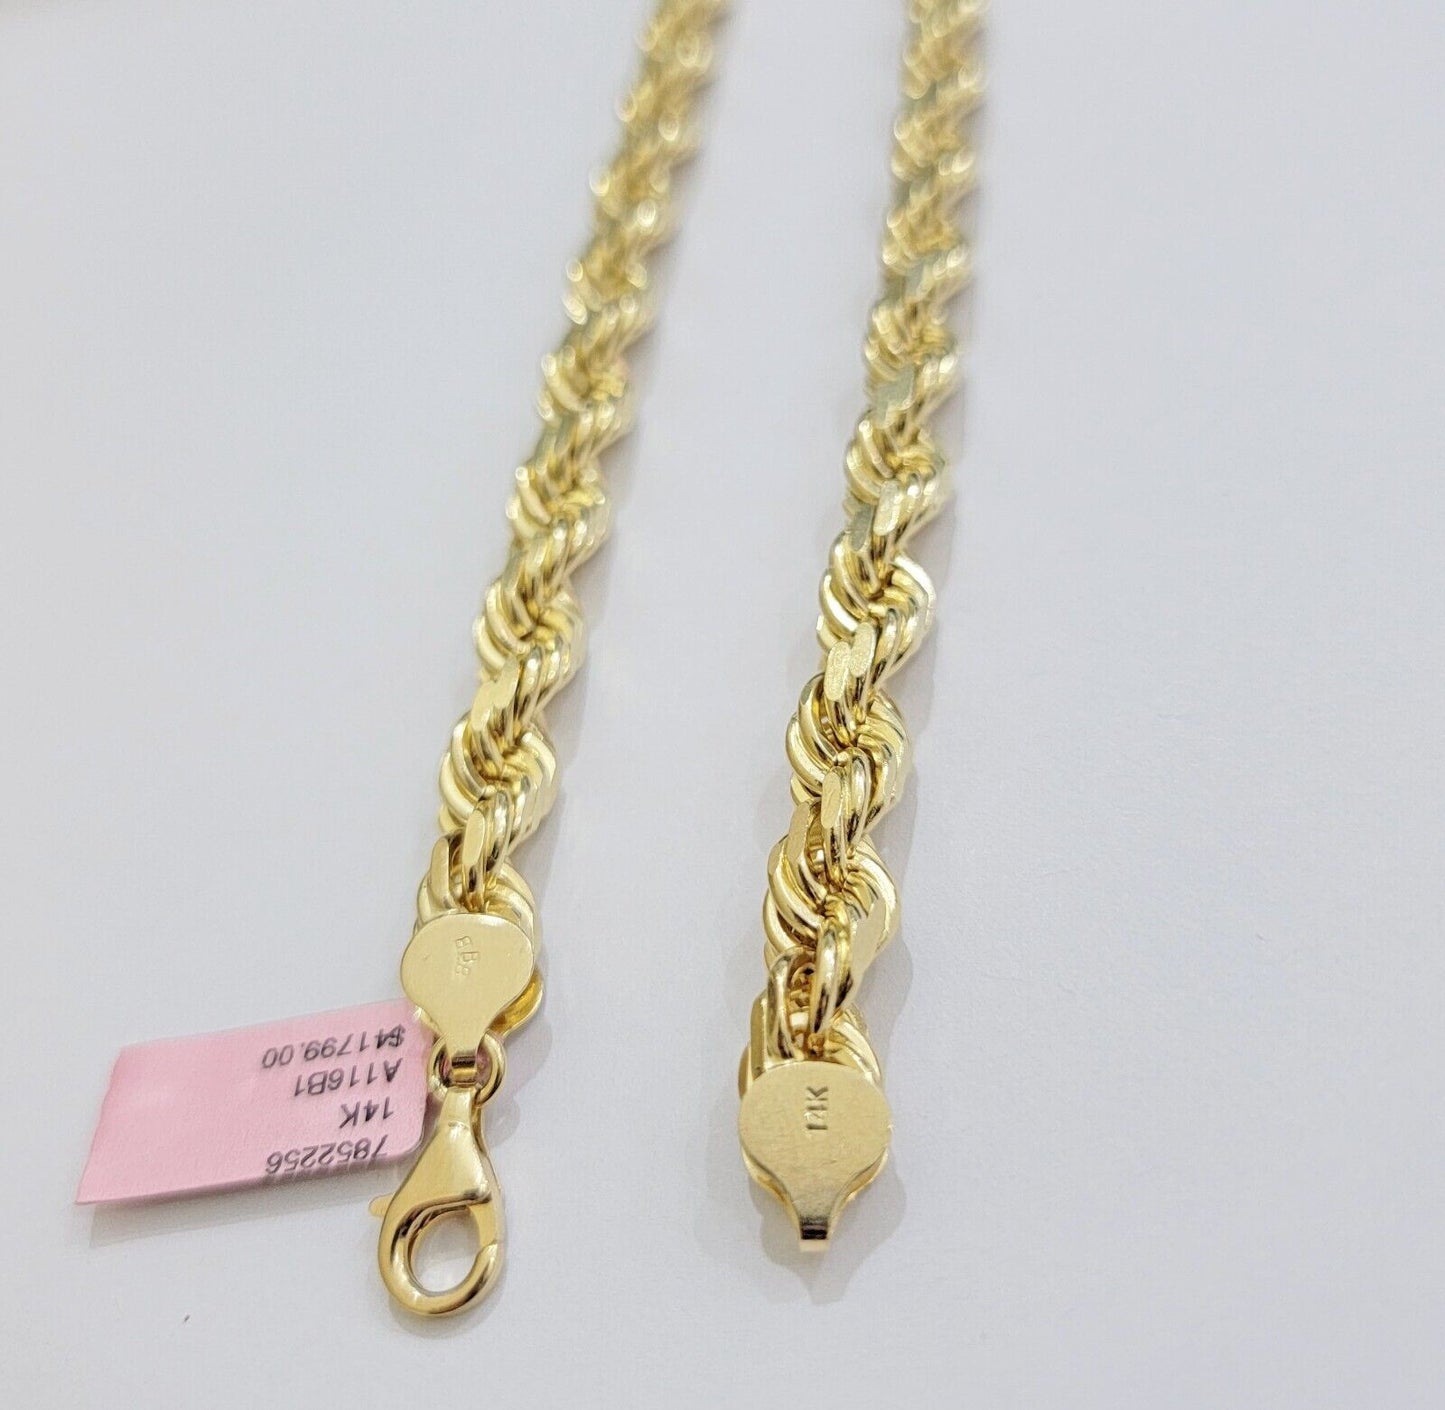 Real 14k Gold Rope Chain Necklace 8mm 22 Inch Diamond Cut SOLID 14kt Yellow Gold